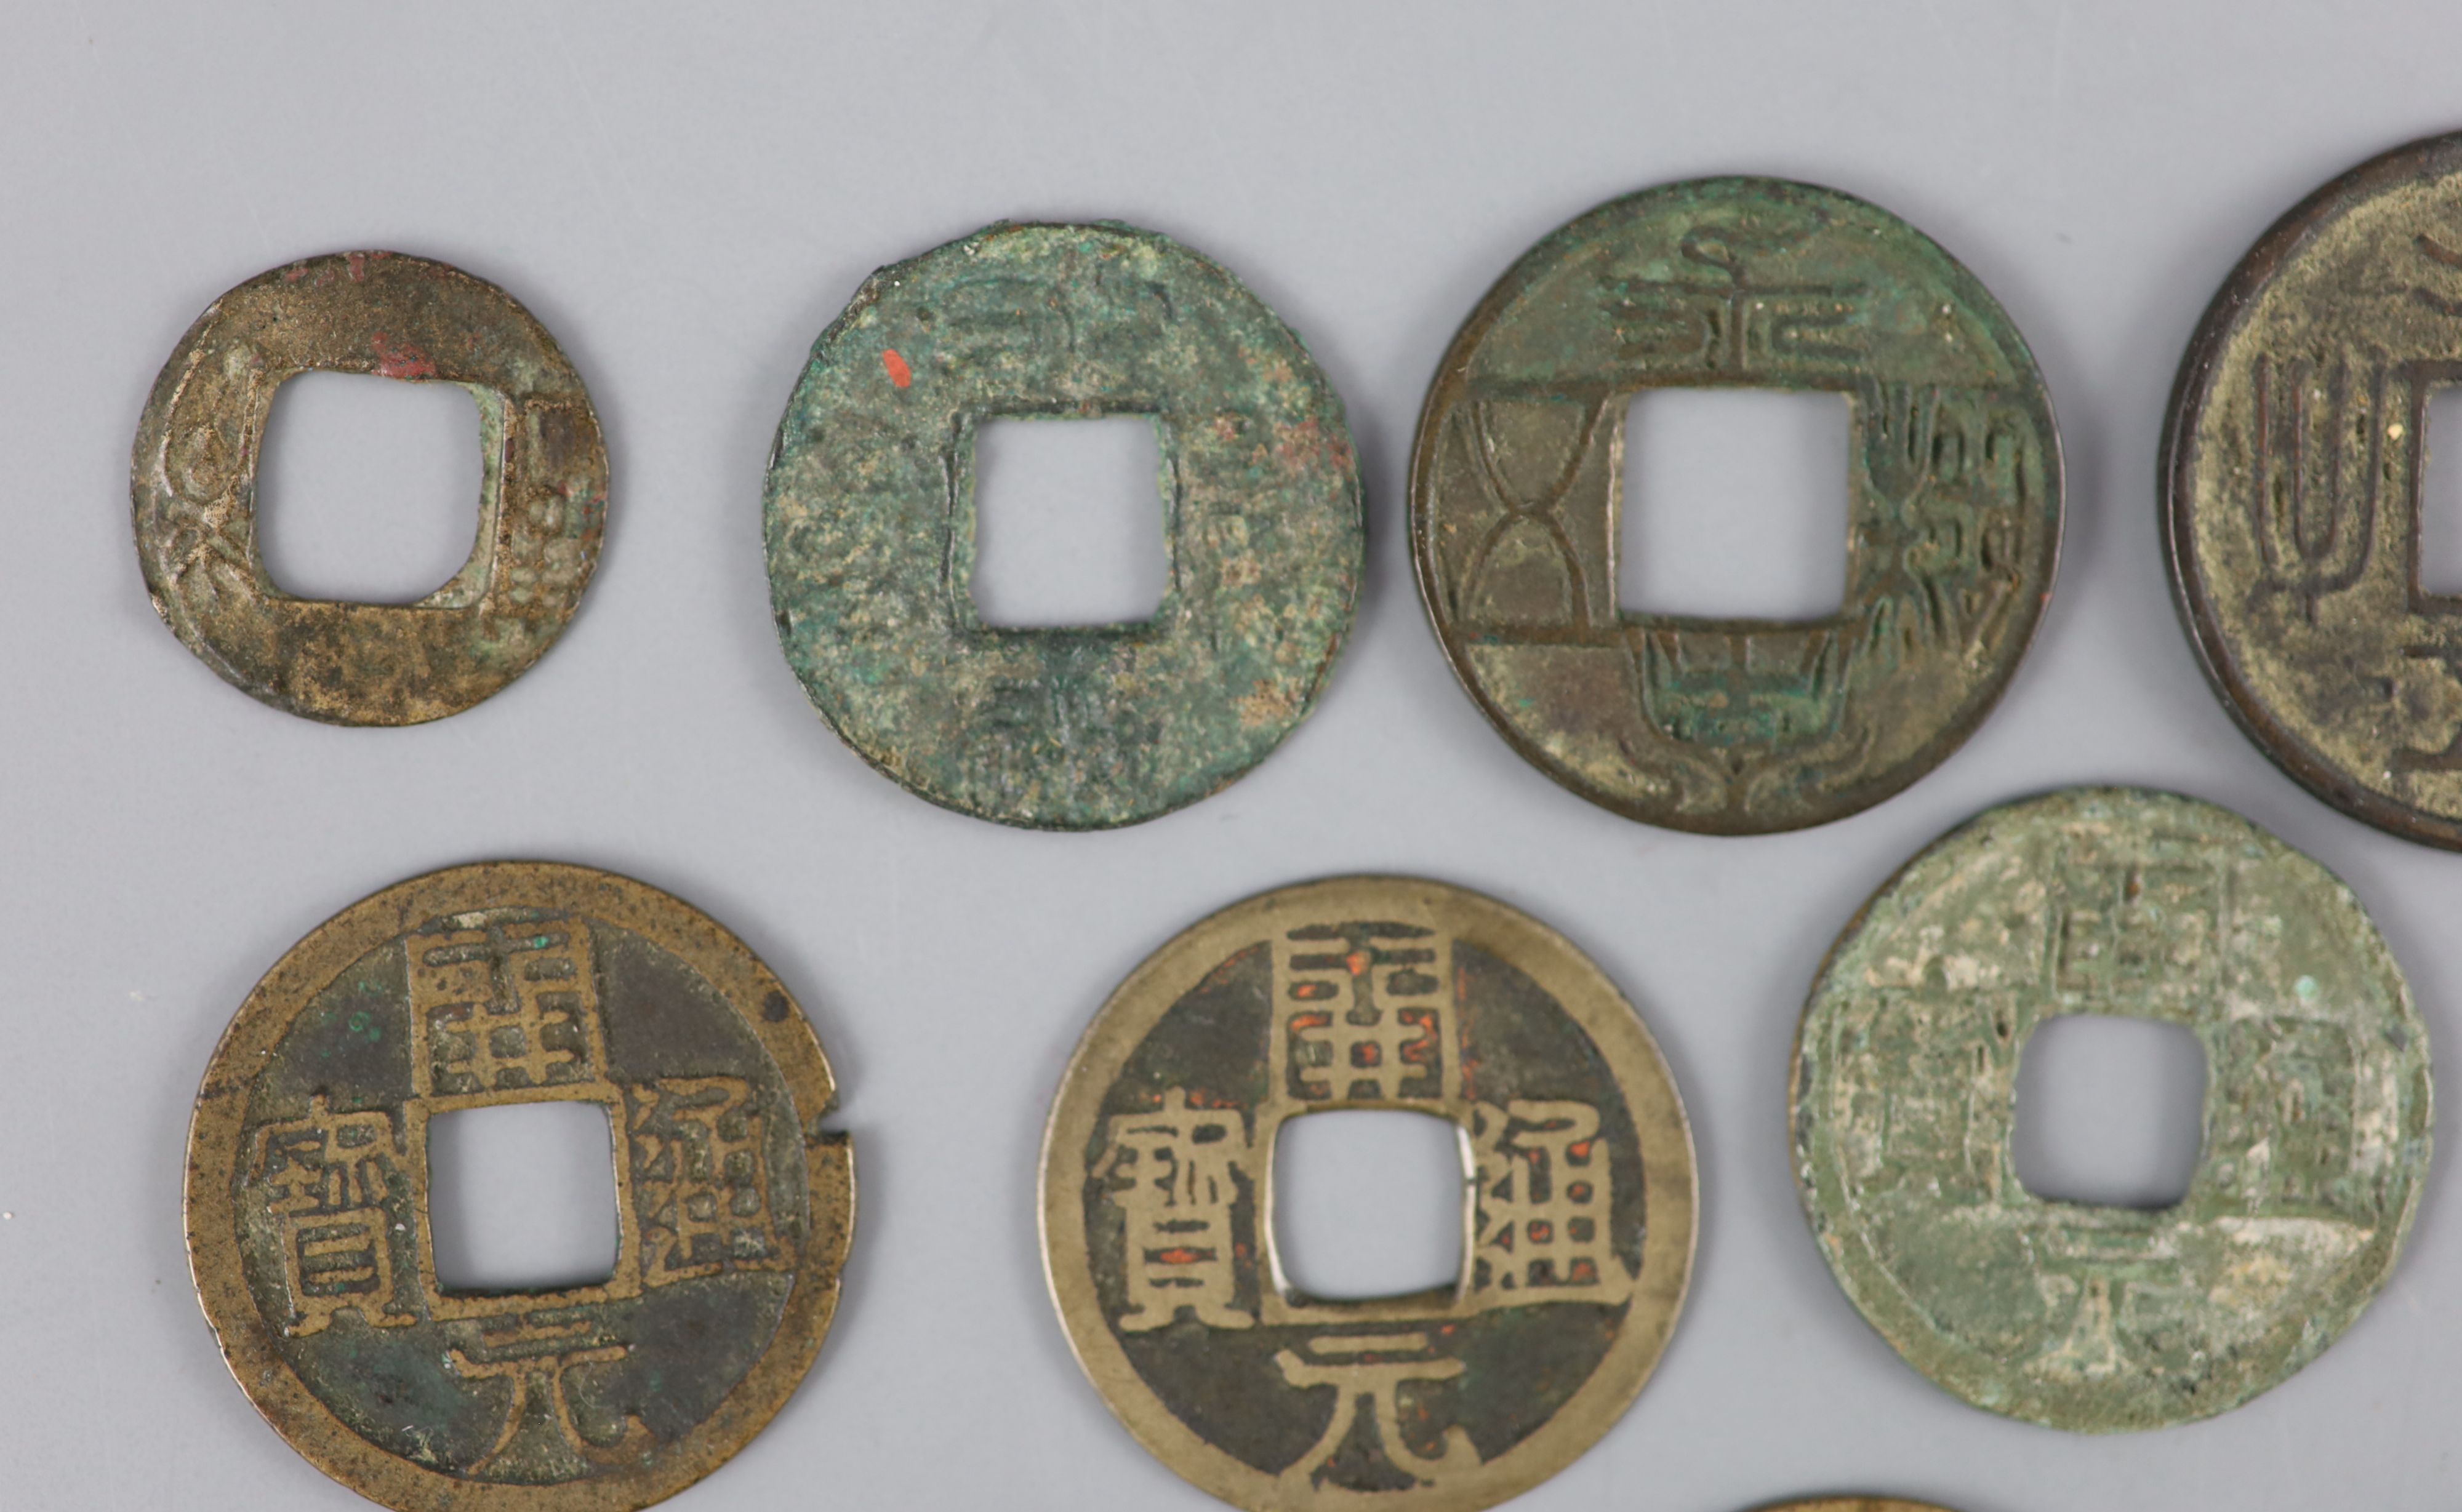 China, 18 Ancient bronze round coins, Southern Dynasties (420 AD) to Tang dynasty (907 AD)